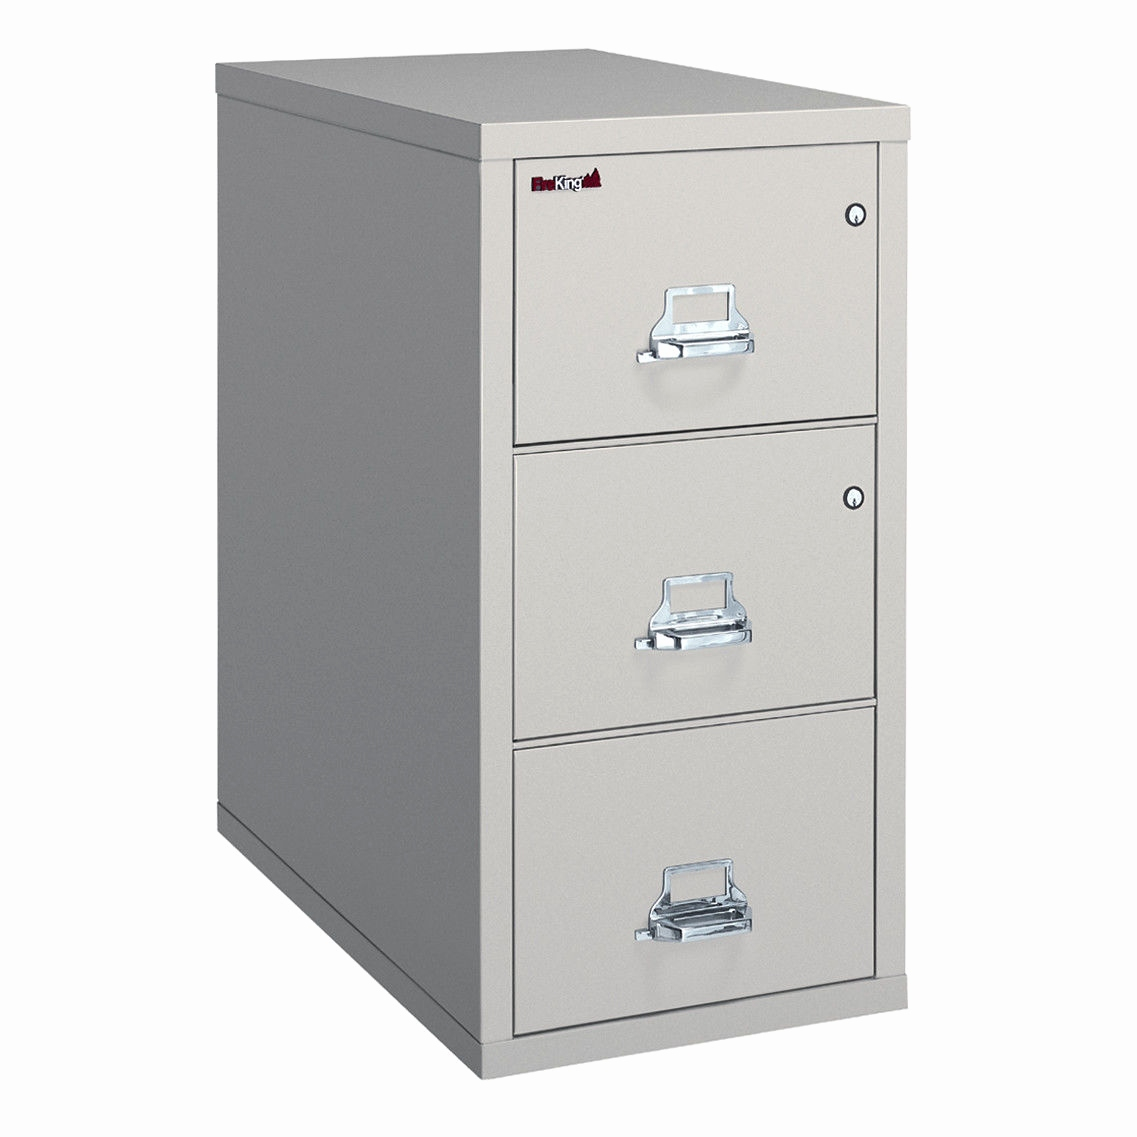 Officemax File Cabinets Officemax 4 Drawer File Cabinet Imanisr Com intended for measurements 1137 X 1137